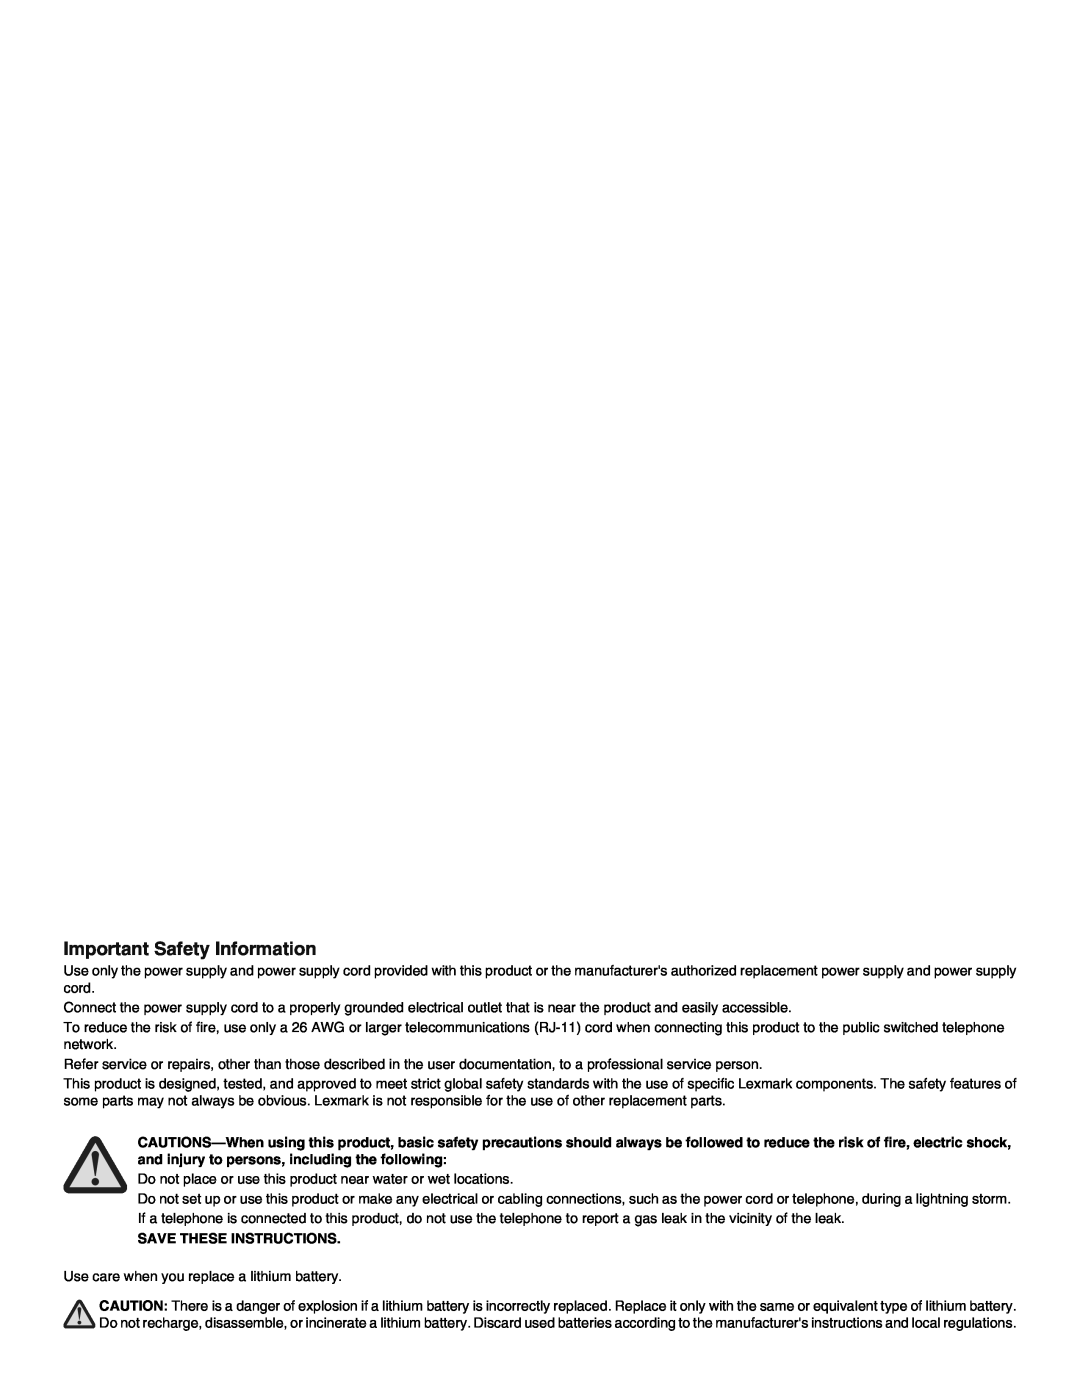 Lexmark 5400 manual Important Safety Information, Save These Instructions 